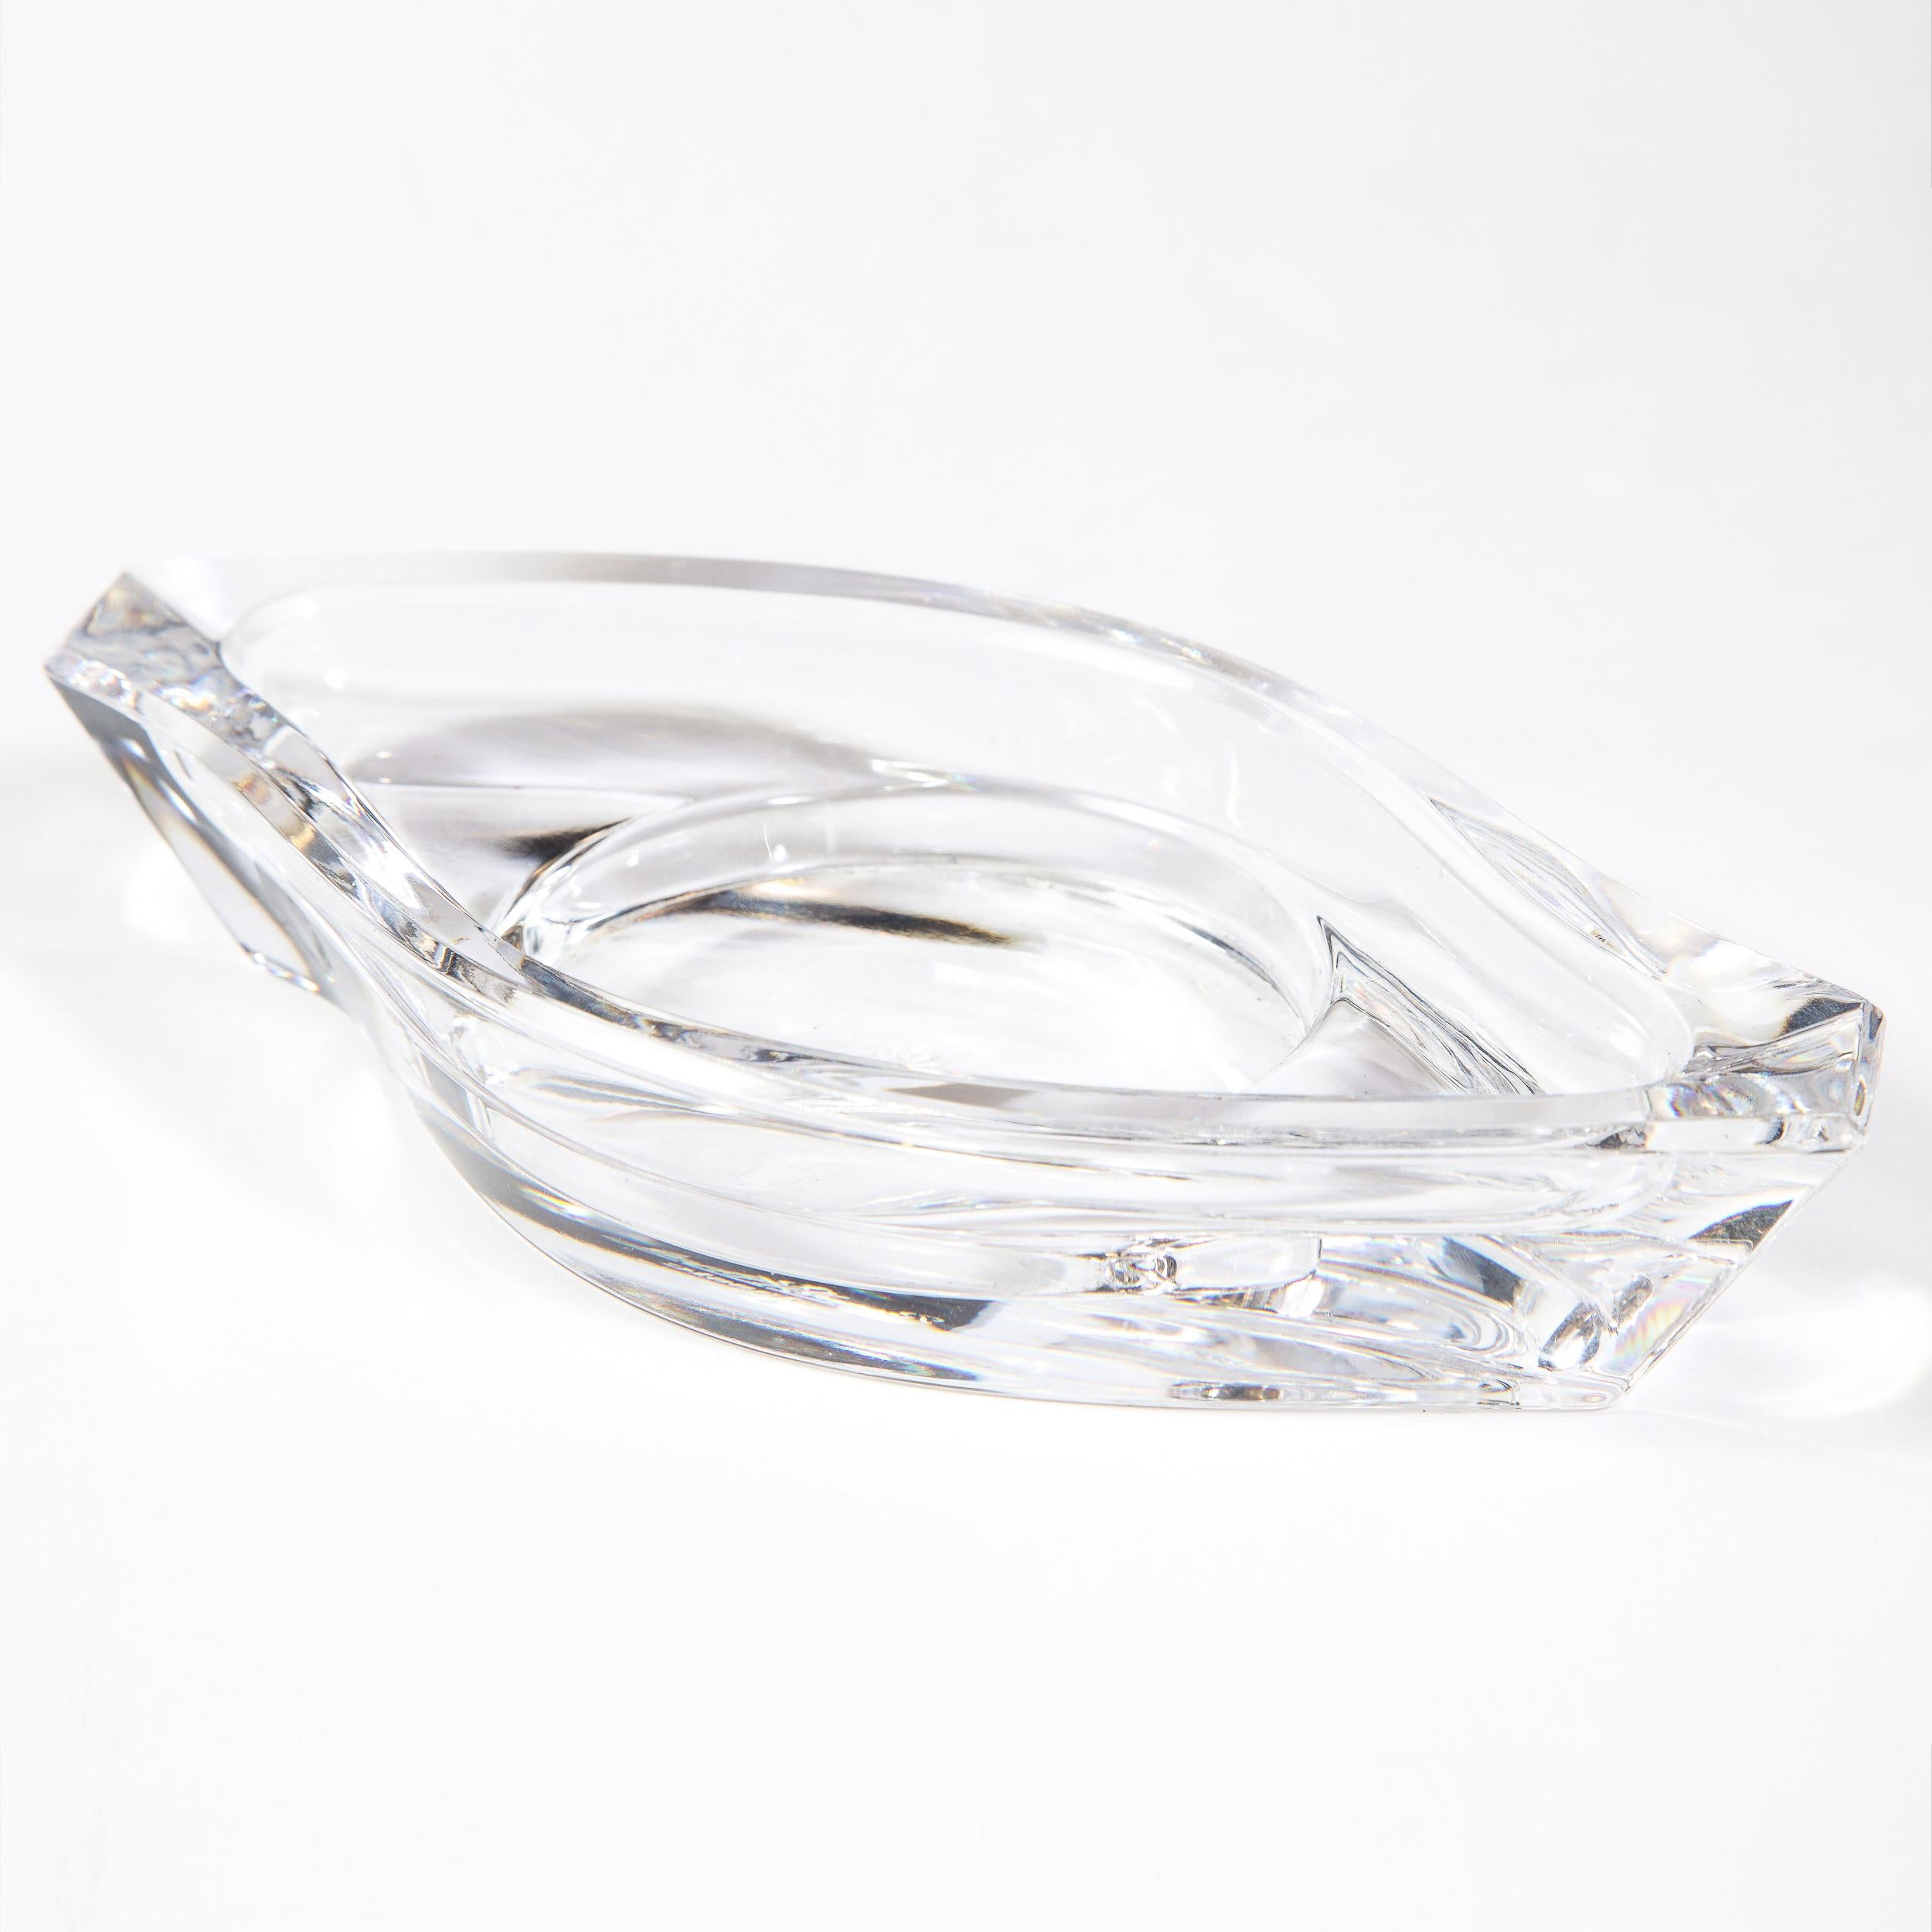 20th Century Modernist Translucent Glass Stylized Egyptian Eye of Horus Dish by Rosenthal For Sale